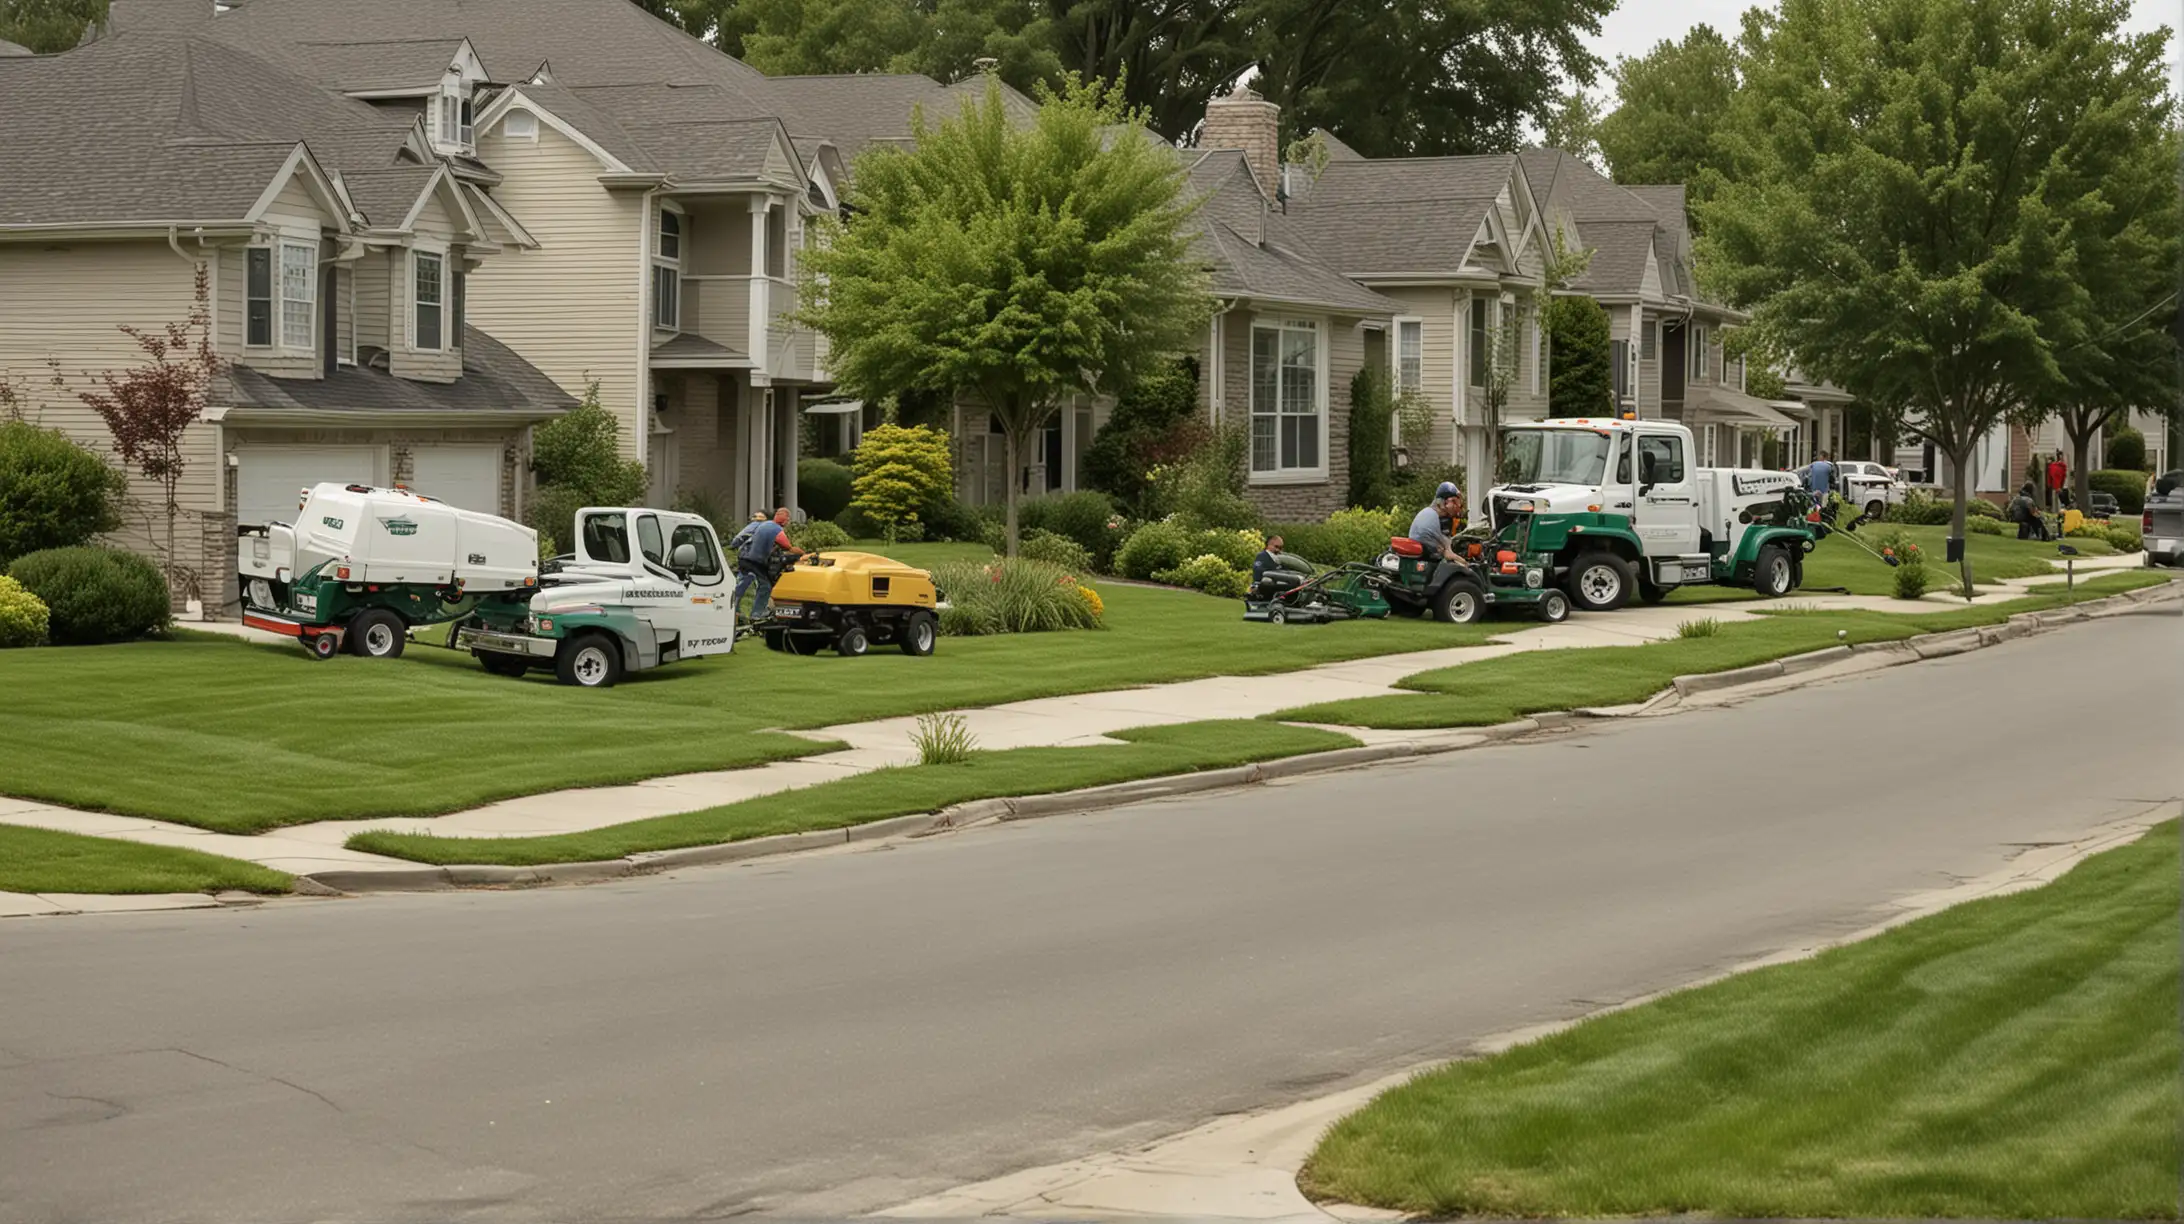 Professional Landscape Company Mowing and Weed Whacking Neighborhood Lawn